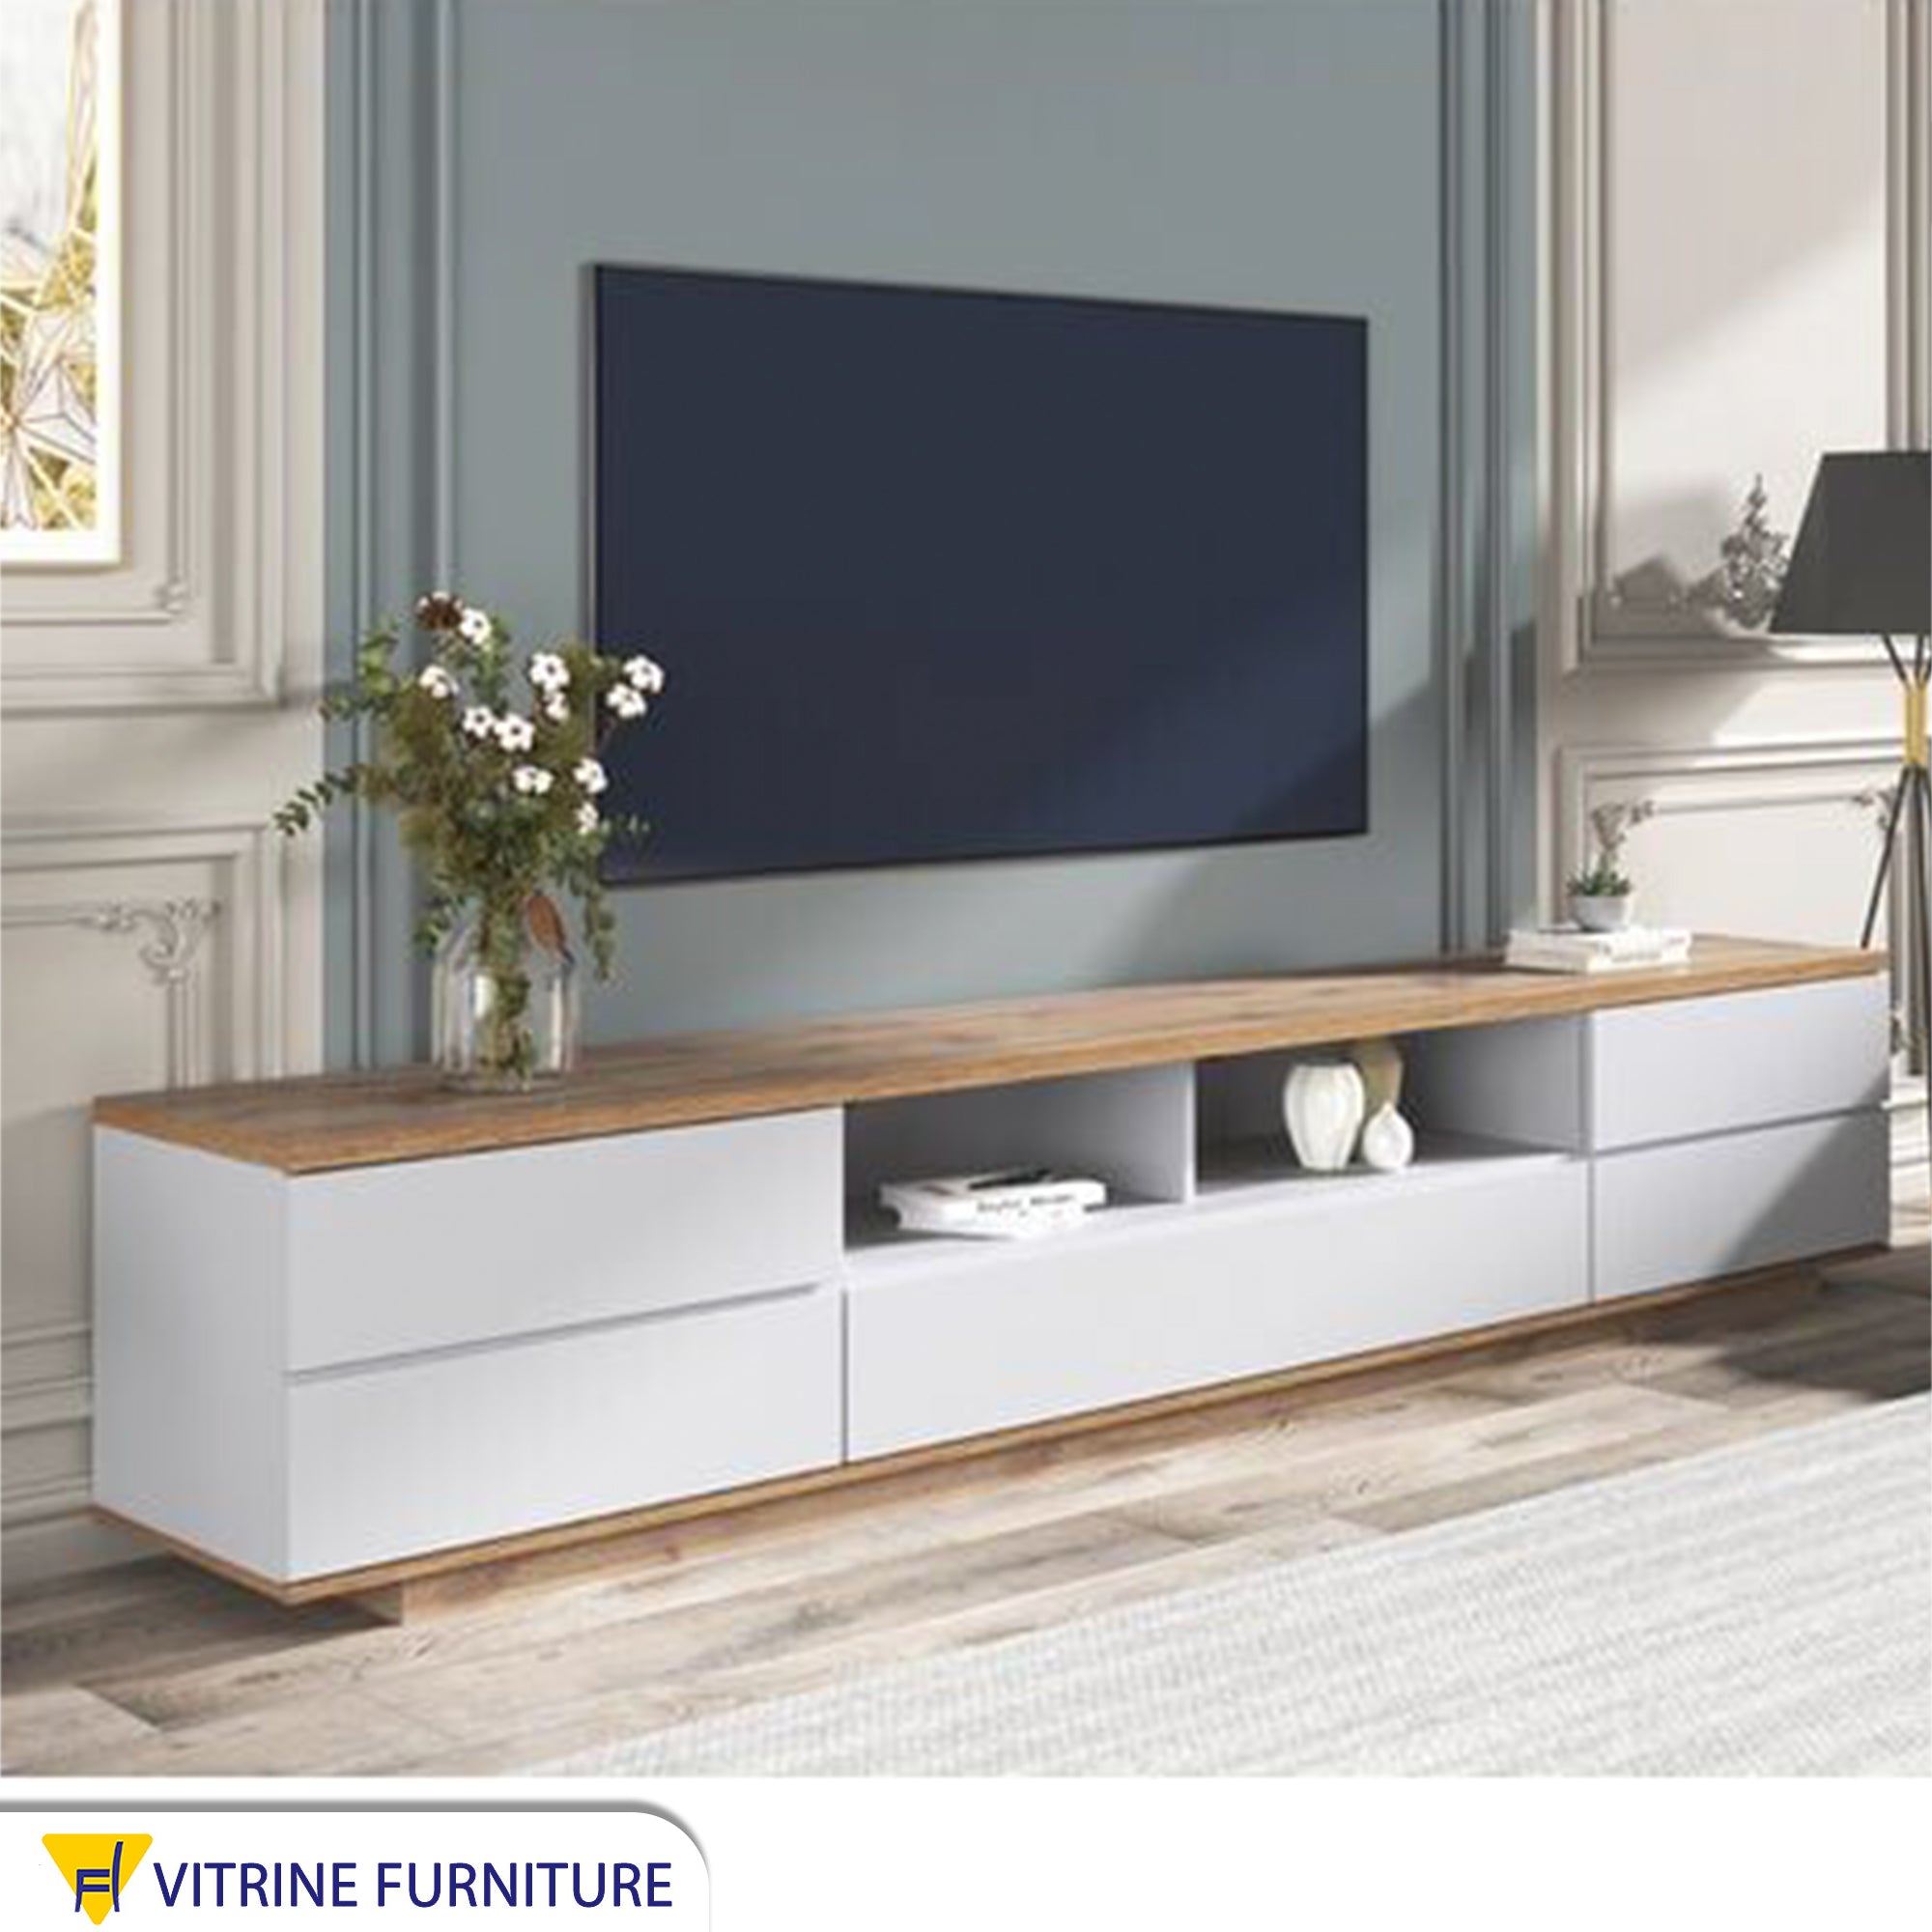 Rectangular TV unit with 5 drawers